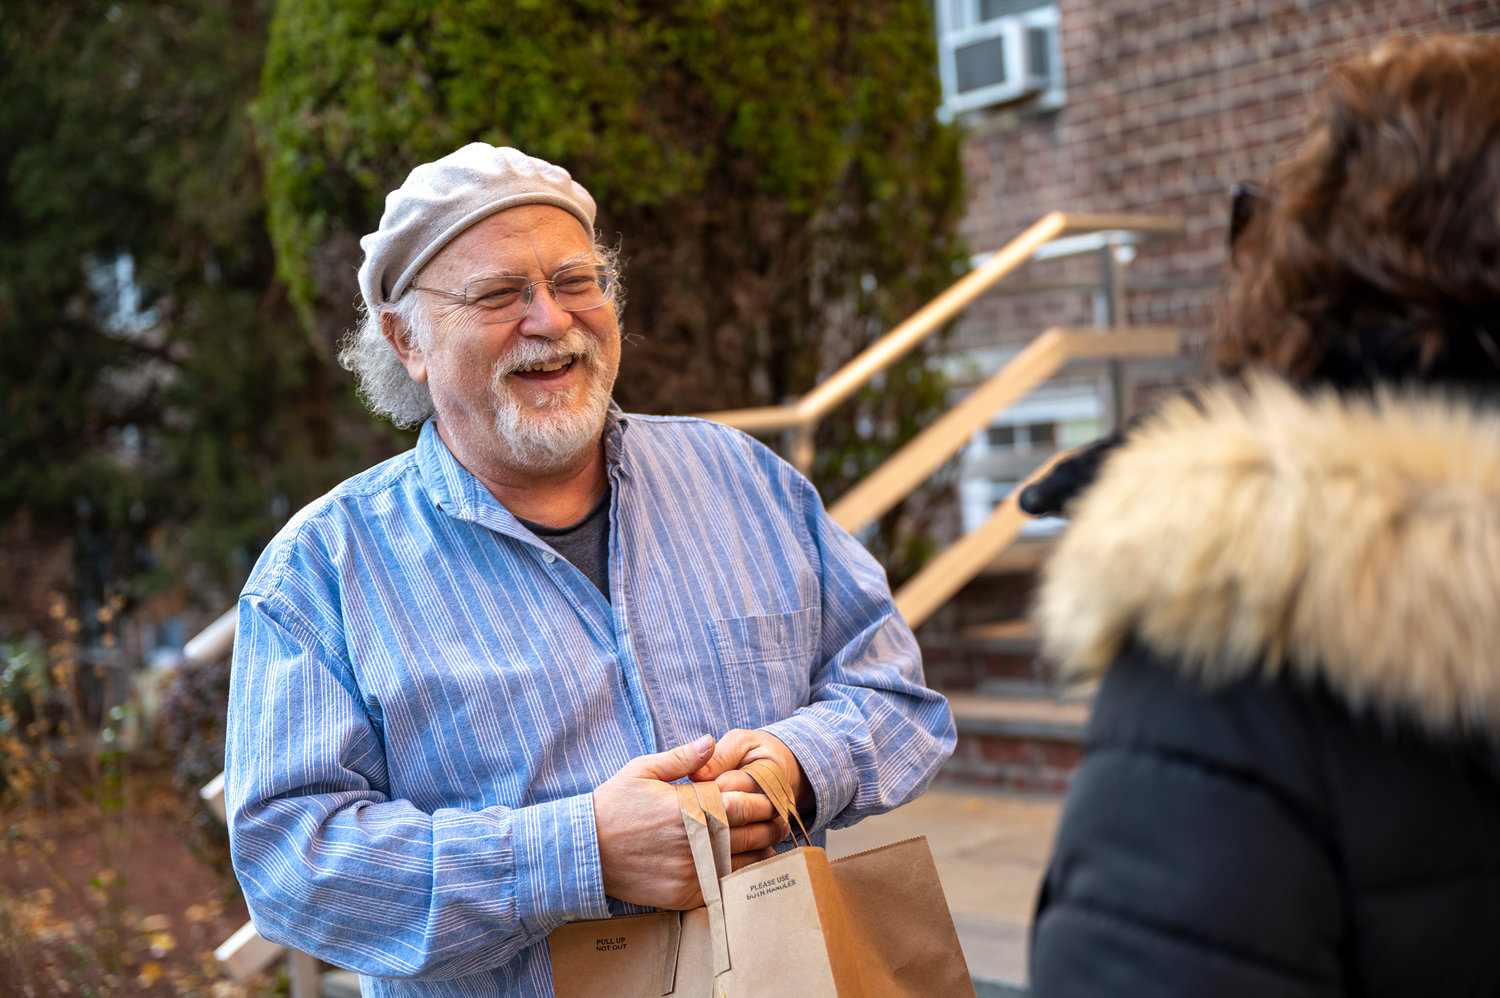 Arnie Adler swapped one of his sourdough breads with his neighbor for her own homemade treat just in time for Thanksgiving. While Adler focused on bartering when he first started baking earlier this year, he’s now selling many more loaves than he’s trading.